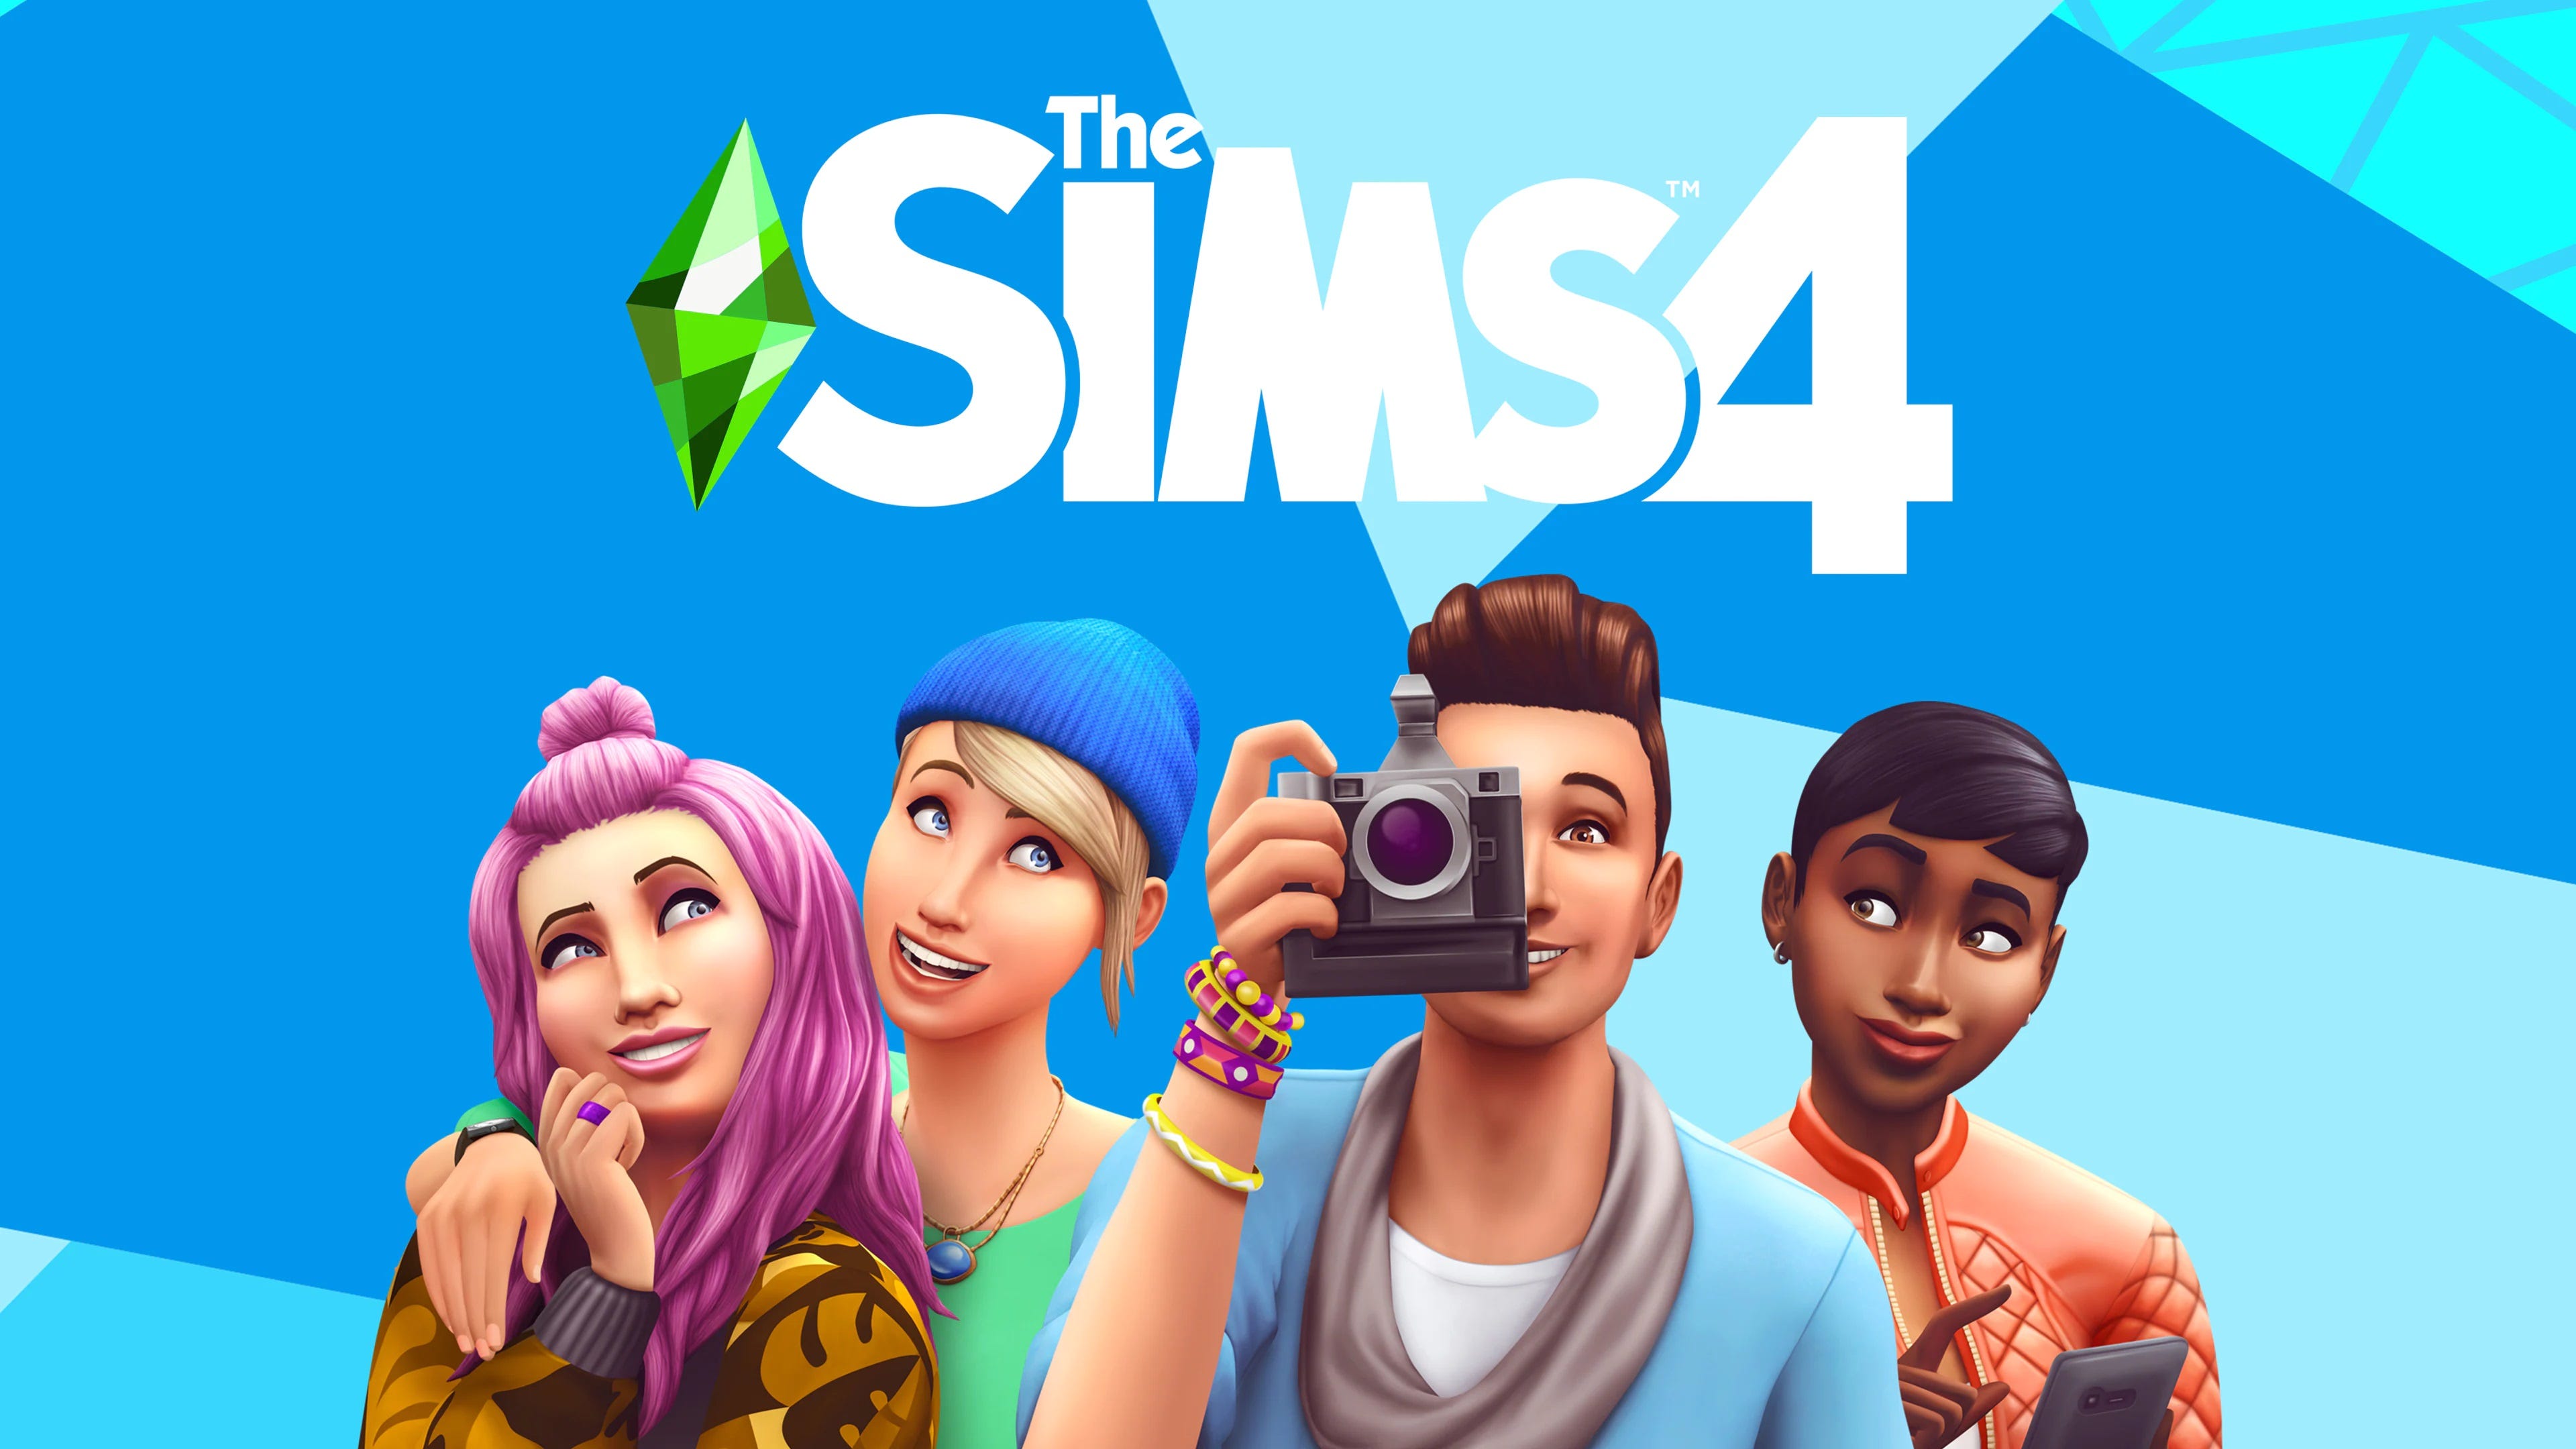 Sims 4 More Cheats In New Menu v1.1  Sims 4, Sims 4 challenges, Sims 4  gameplay